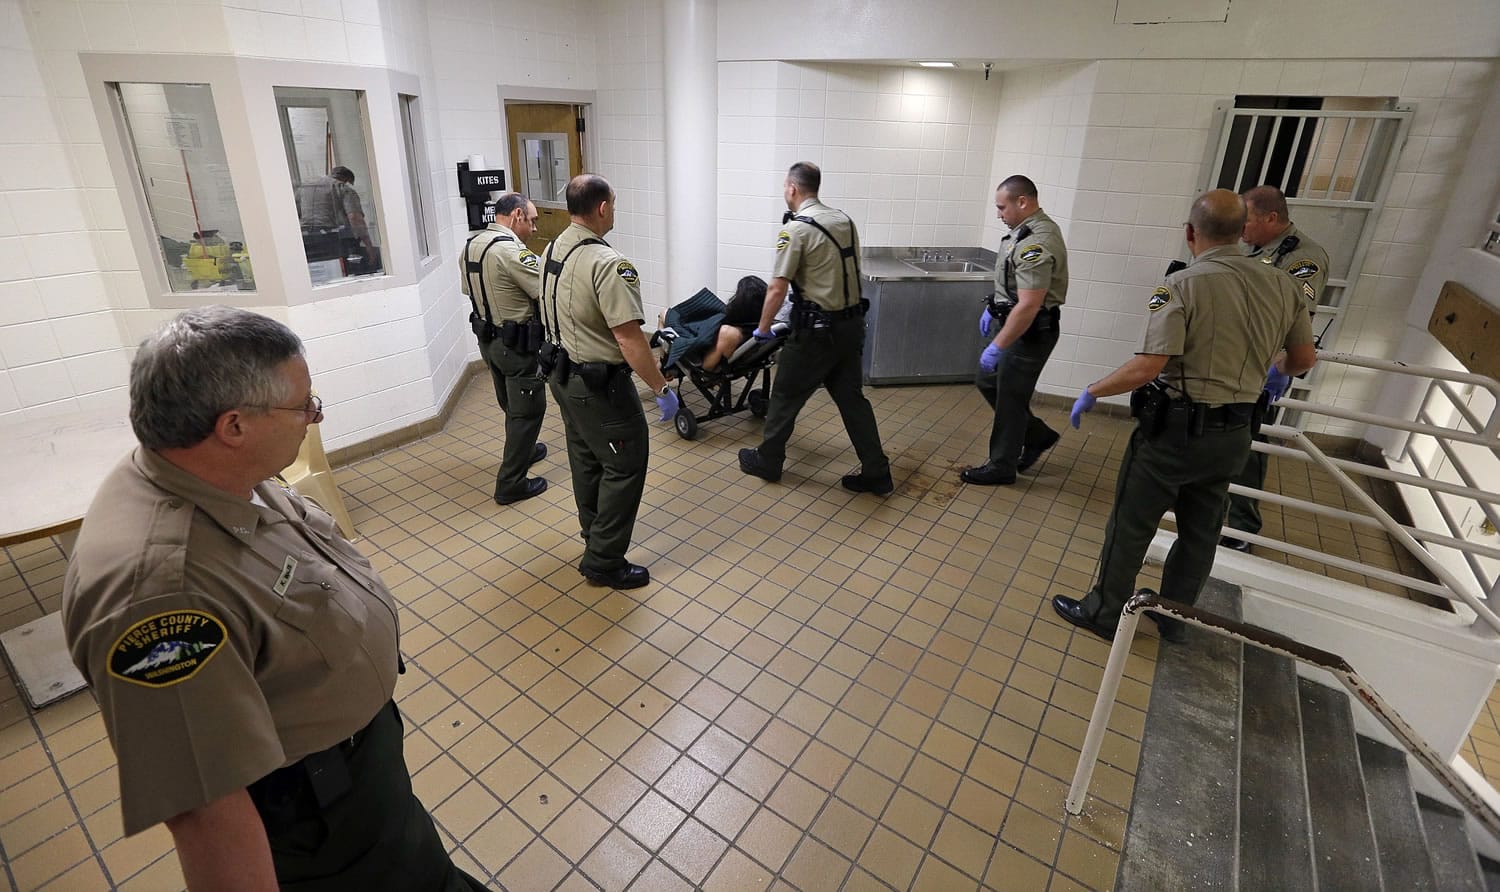 FILE -- In this file photo taken Oct. 15, 2014, corrections deputies transport an inmate, who had stripped himself naked and declined to walk, from the psychiatric unit of the Pierce County Jail to a hearing in Tacoma, Wash. Washington state judges have issued more than a dozen contempt orders against the state's health services agency and a psychiatric hospital for failing to treat mentally ill people held in jails for sometimes months. To date, the orders have topped $45,000.